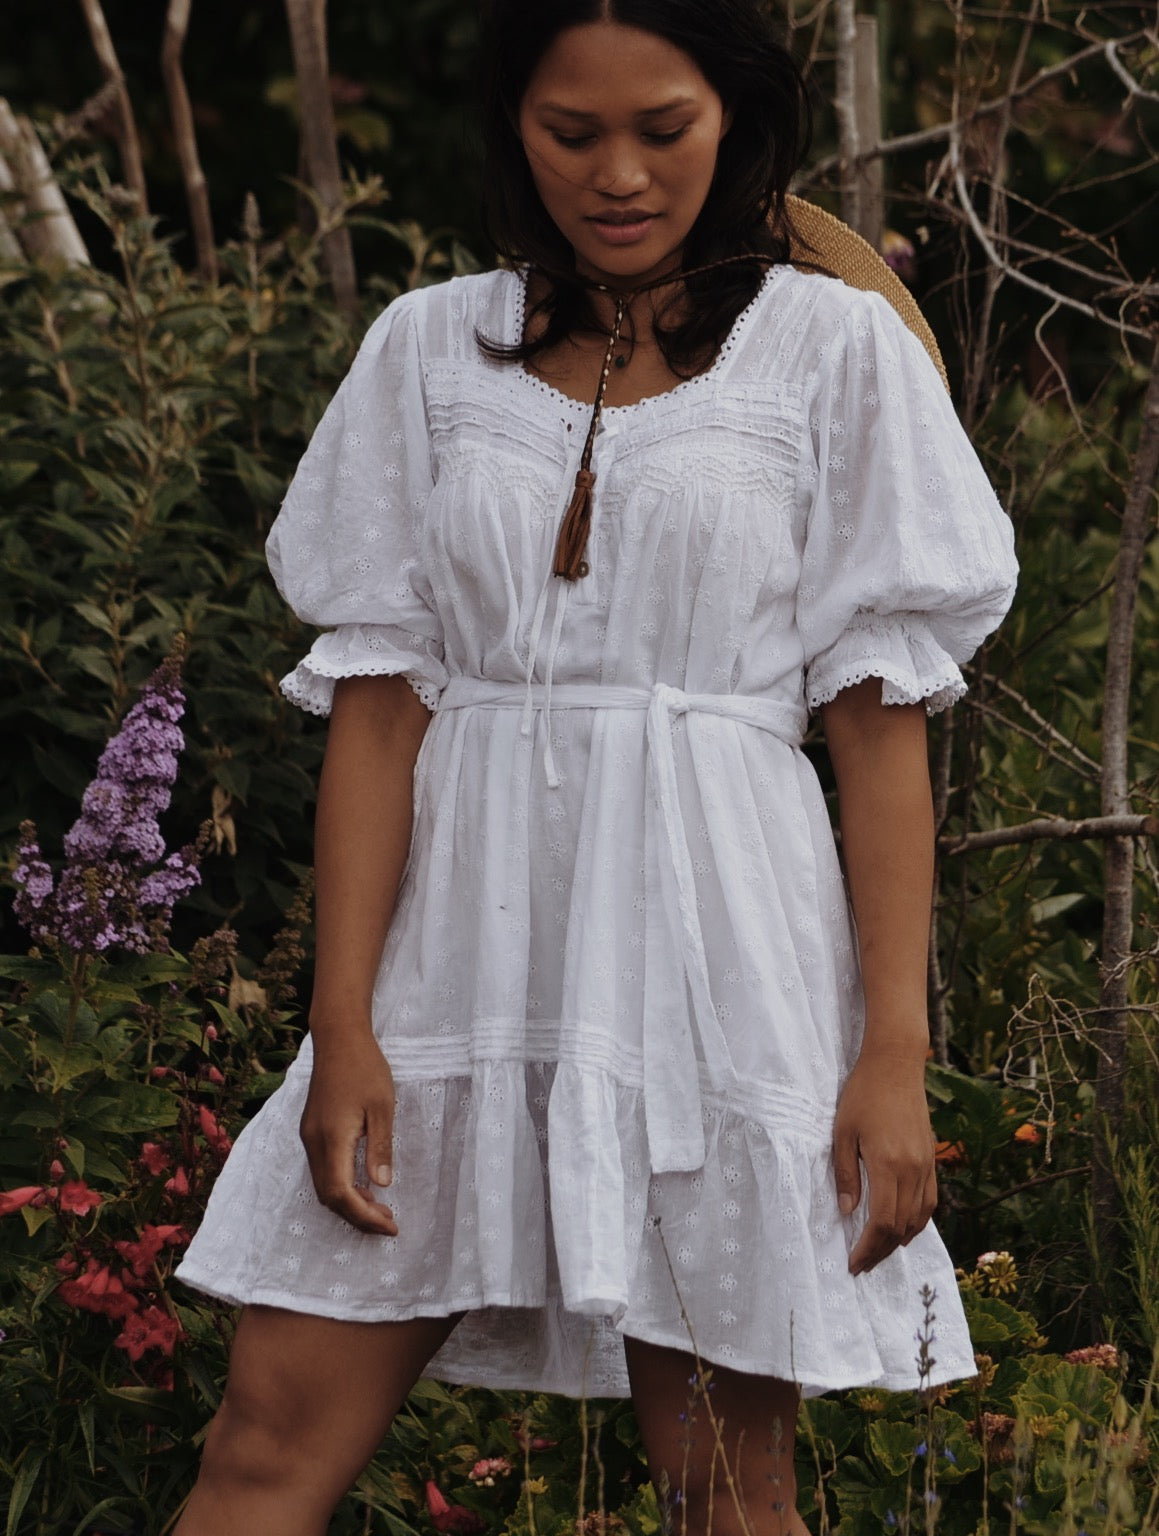 SMALL RESTOCK - MORNING SONG HAND SMOCKED DRESS WHITE COTTON LACE